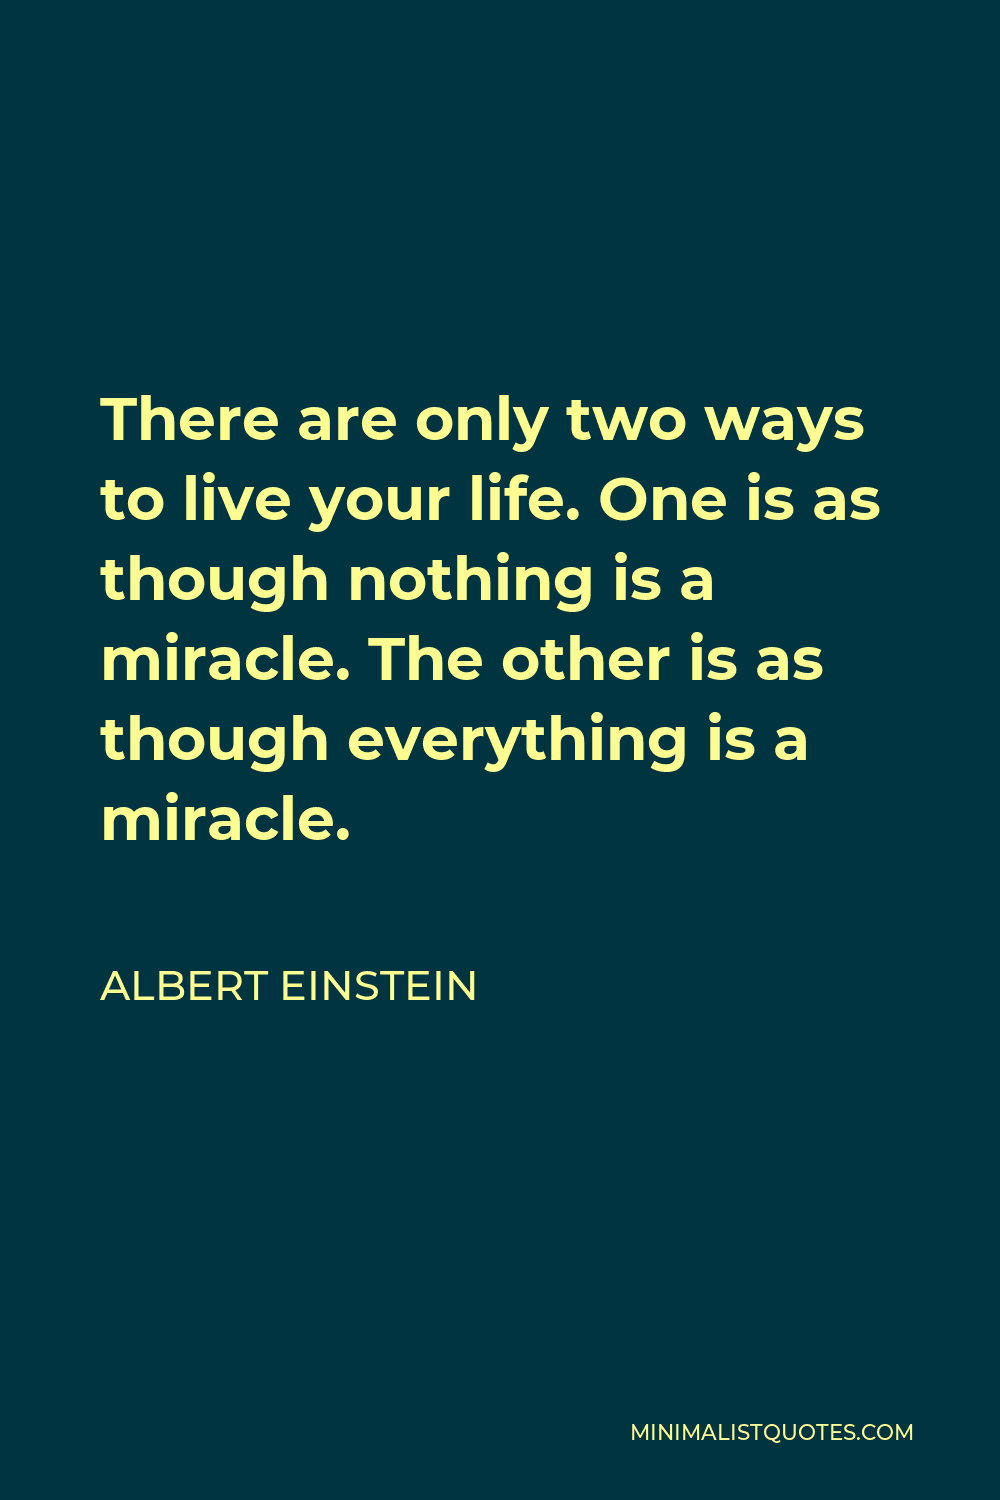 Albert Einstein Quote - There are only two ways to live your life. One is as though nothing is a miracle. The other is as though everything is a miracle.